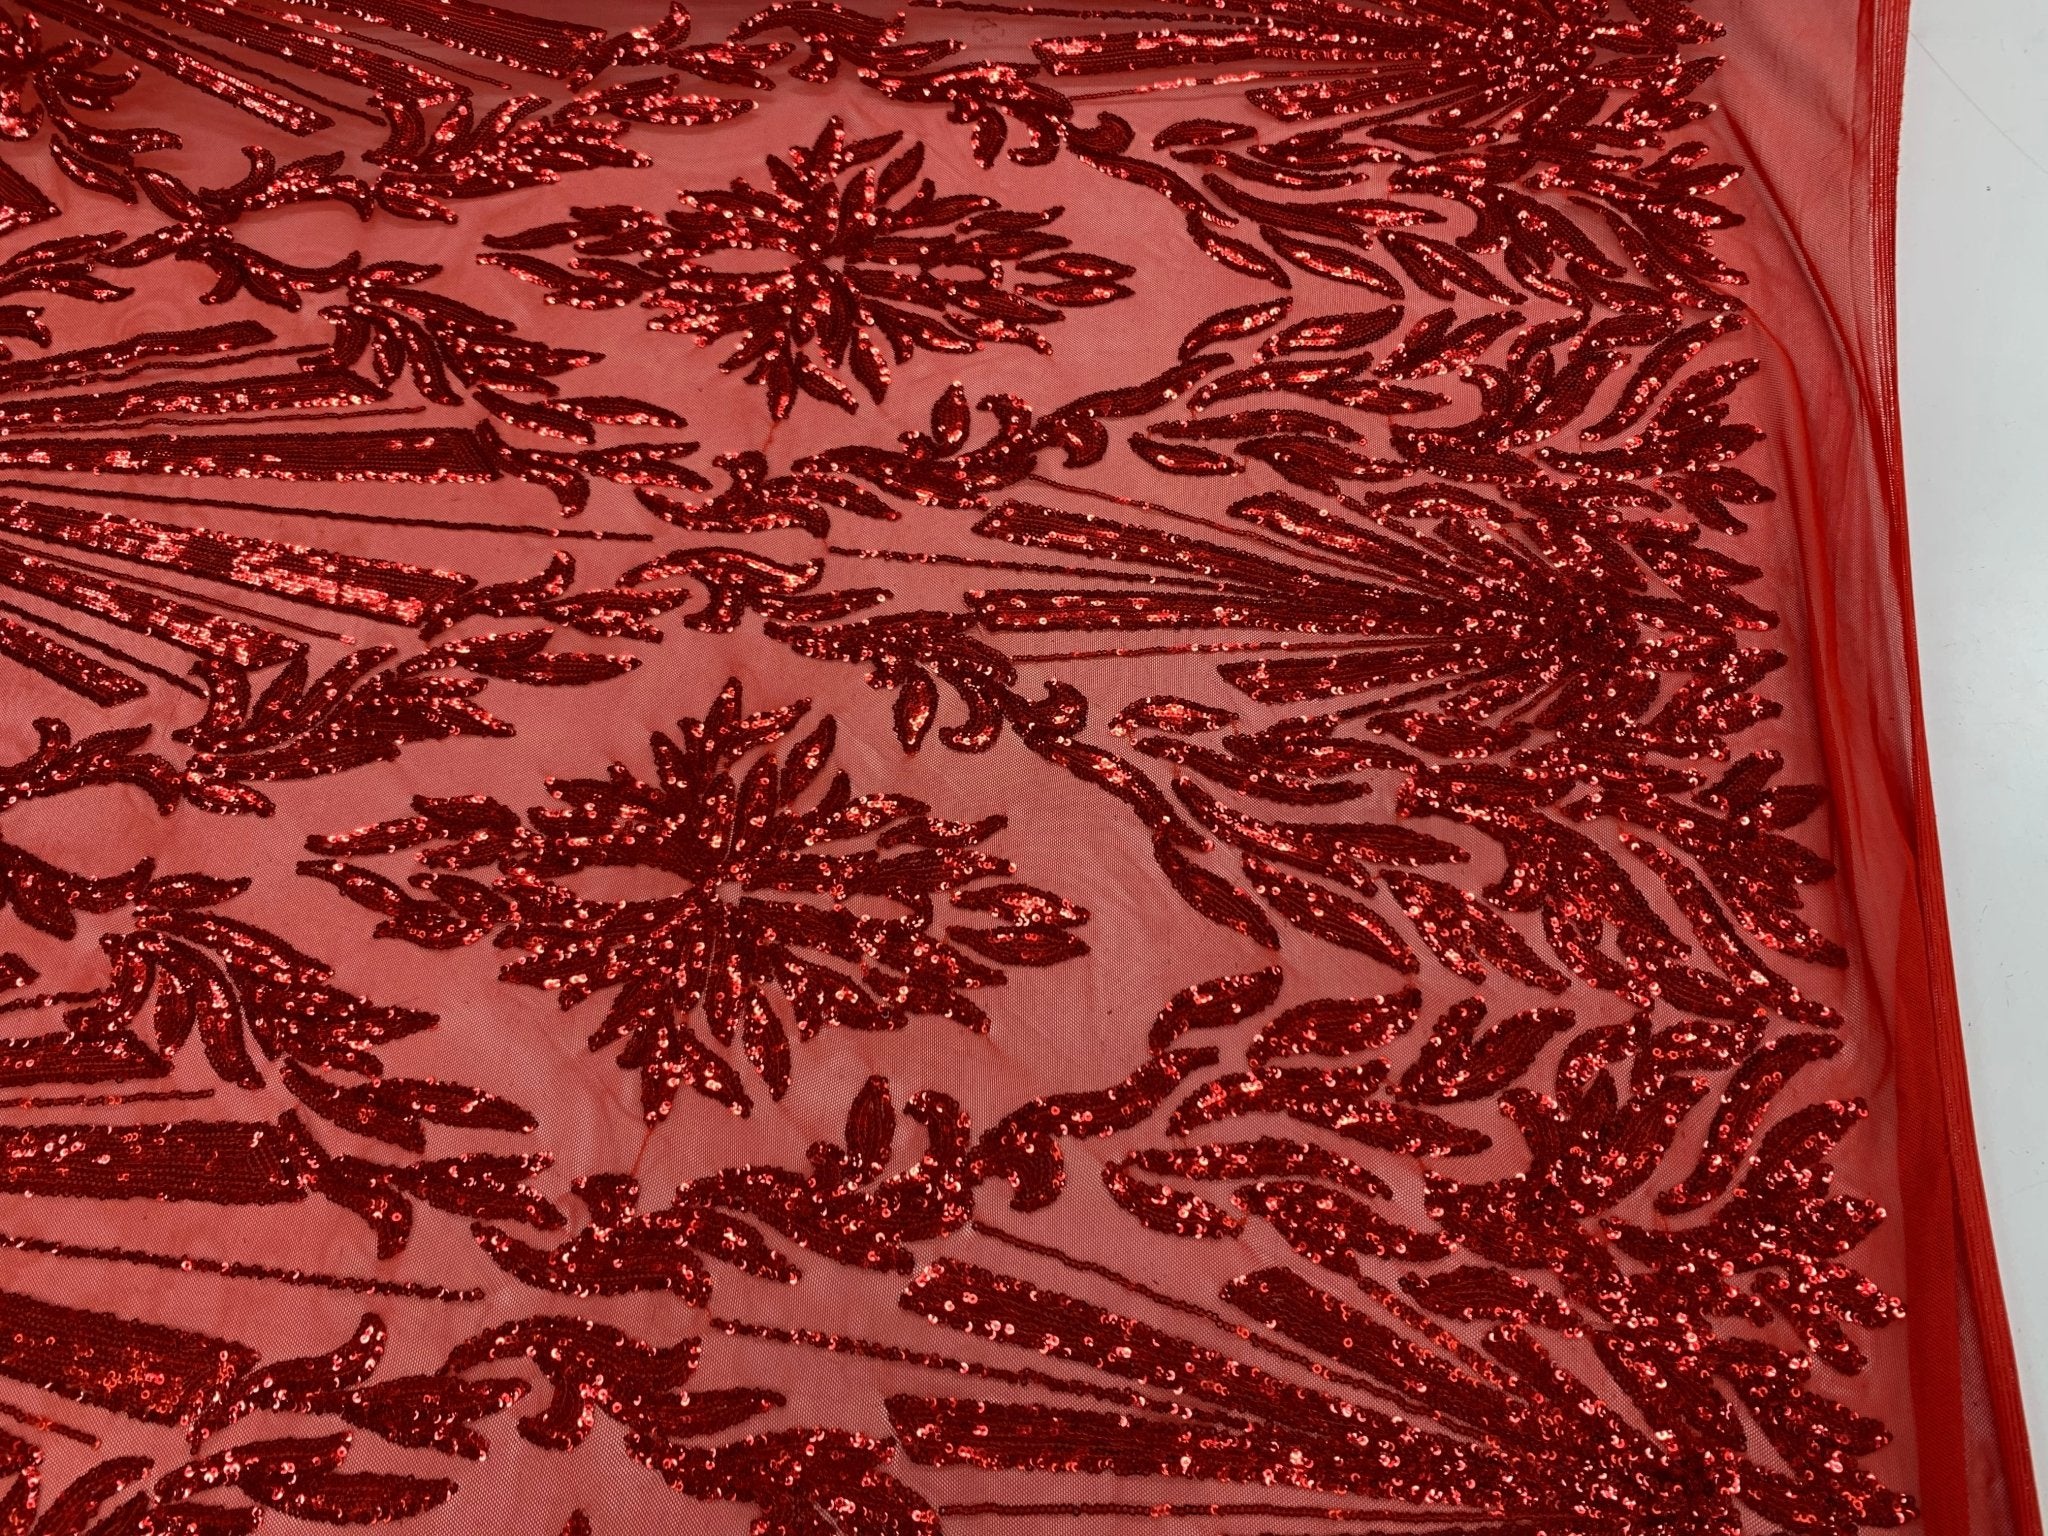 French Embroidery Stretch Sequins Fabric By The Yard on a Mesh LaceICEFABRICICE FABRICSRedFrench Embroidery Stretch Sequins Fabric By The Yard on a Mesh Lace ICEFABRIC Red